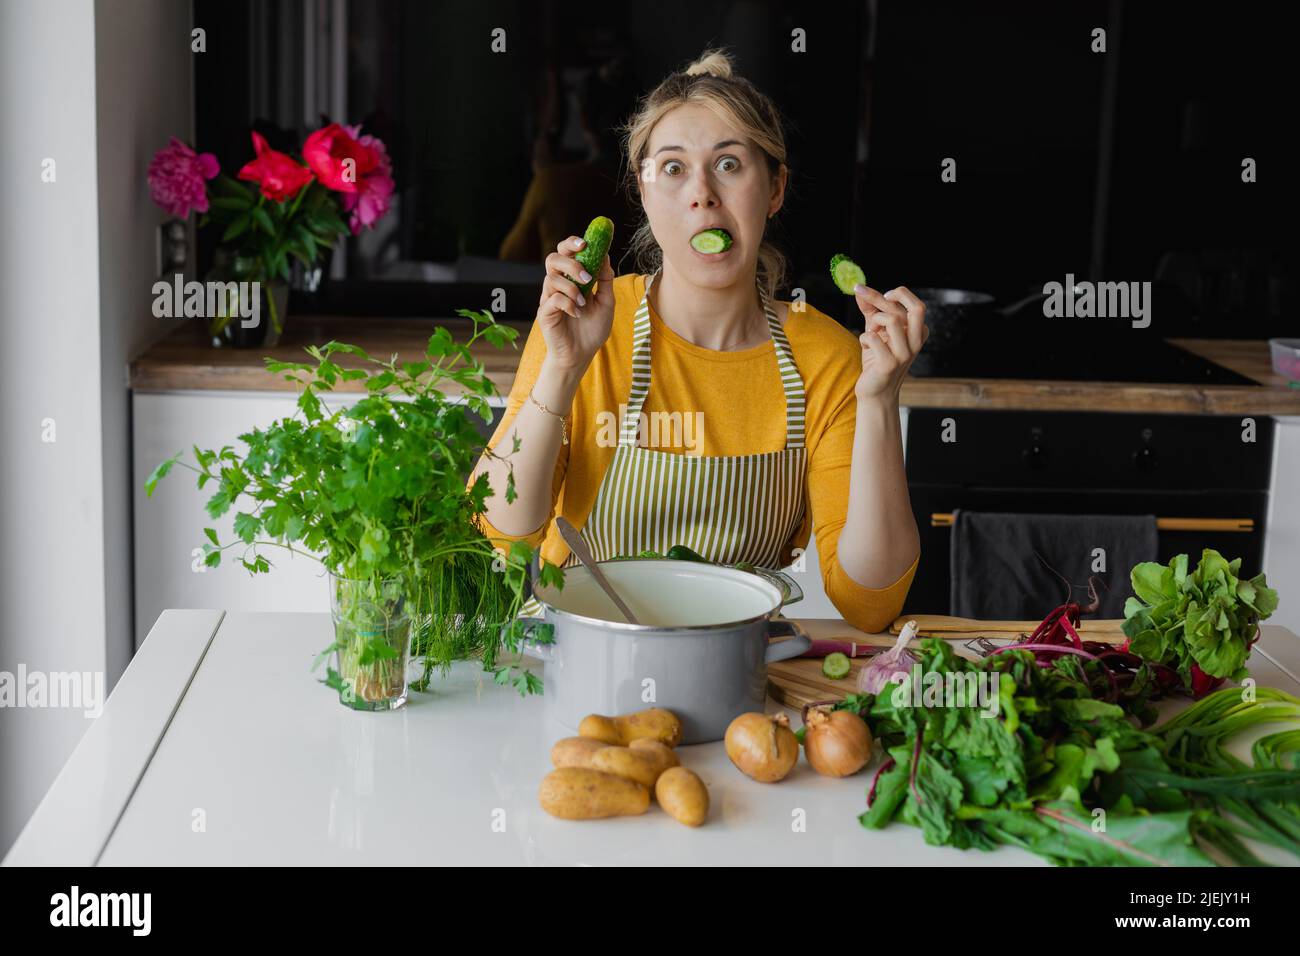 Funny and playful blonde woman looking at camera with cucumber in mouth, chopping fresh vegetables for soup and salad Stock Photo